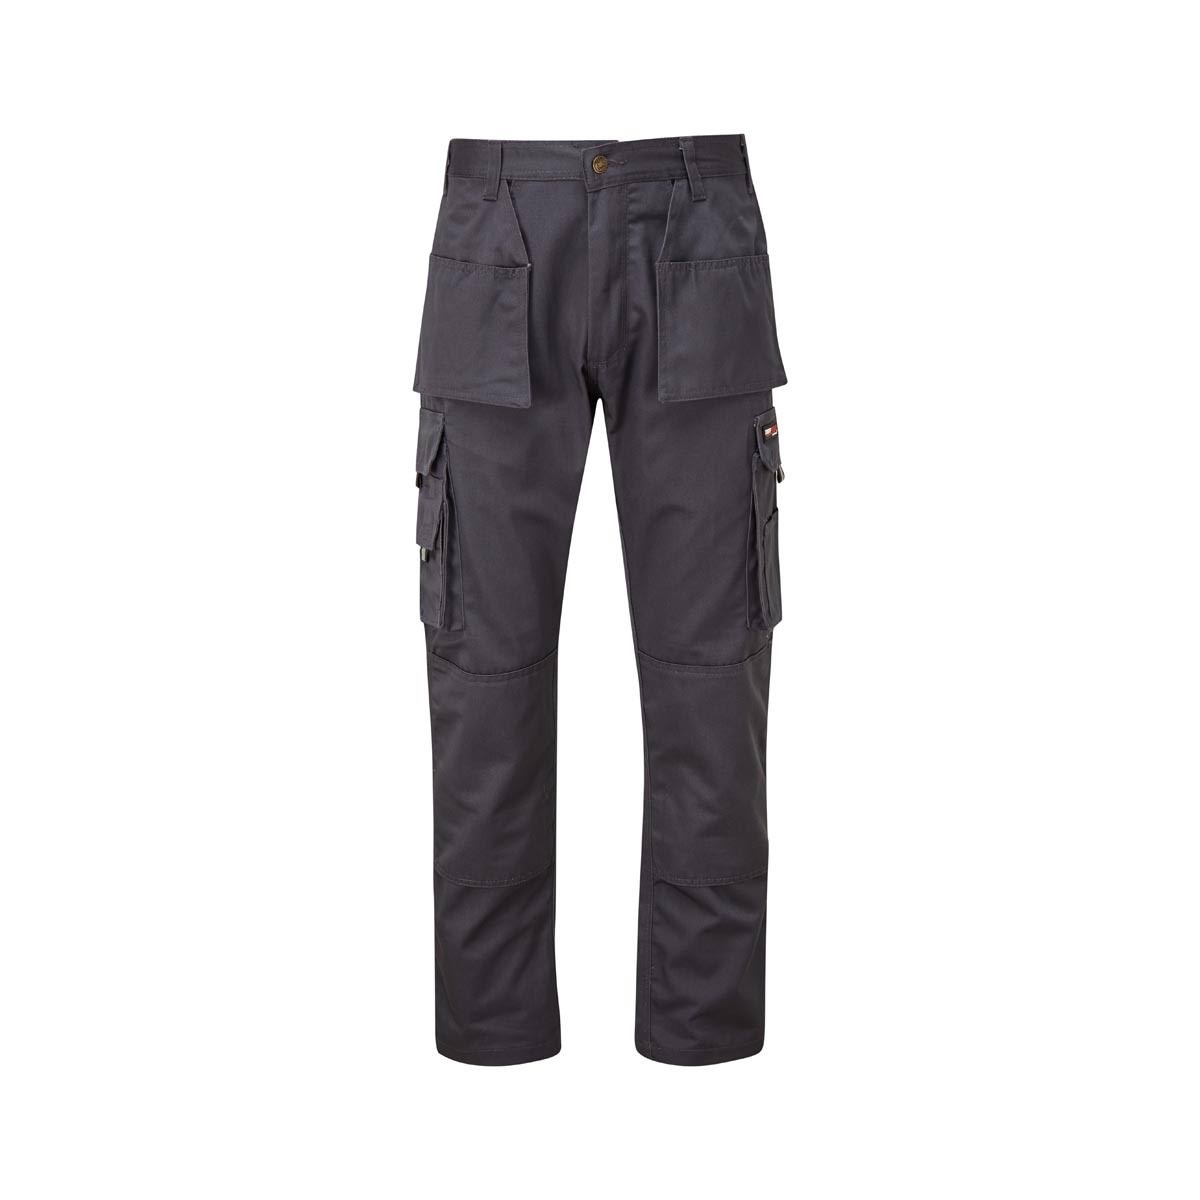 Tuffstuff 711-GRY-28R 711 Pro Work Trousers Grey - 28R | By Toolden